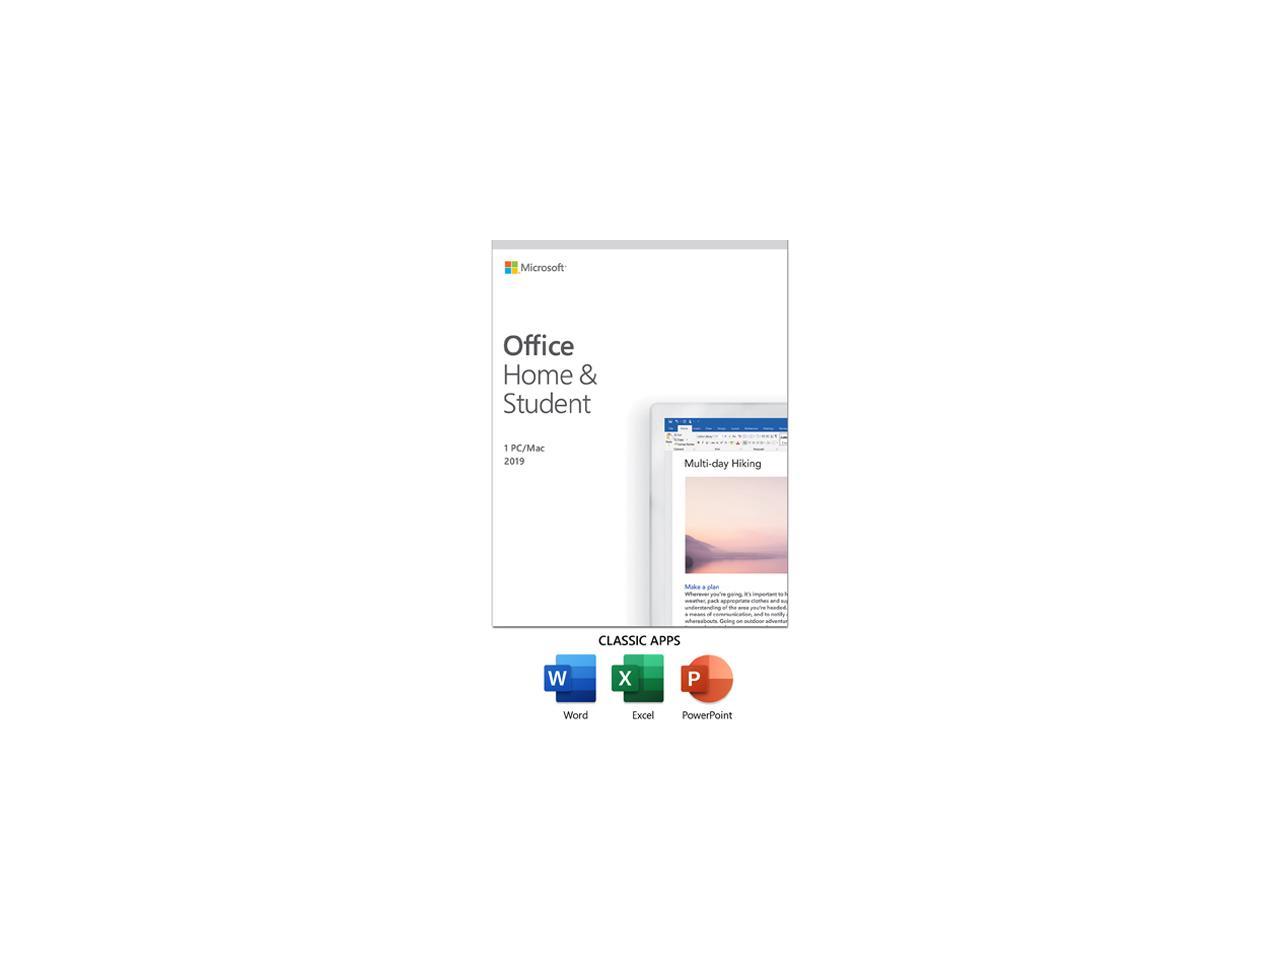 microsoft office home and student 2019 outlook download